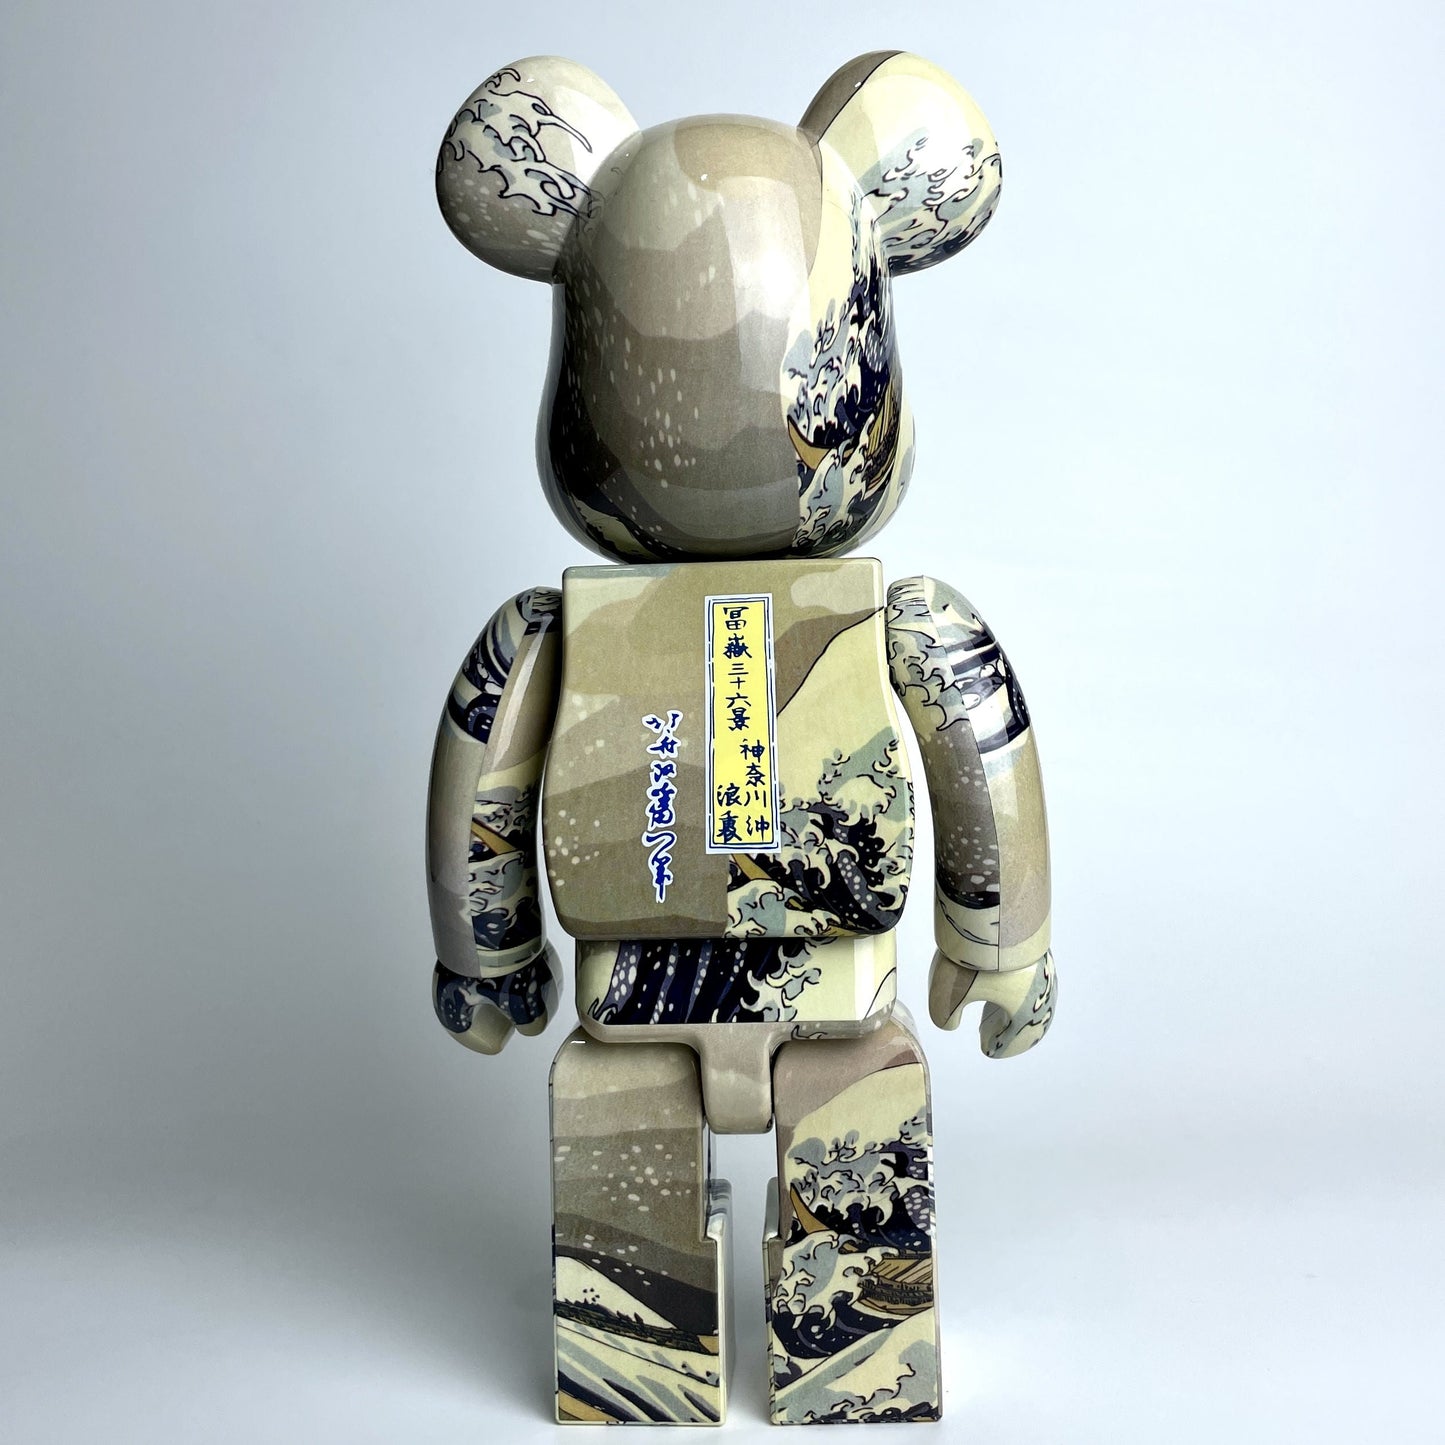 Toy - 28cm BEARBRICK 400% Kanagawa Surf ABS Action Figure Boxed